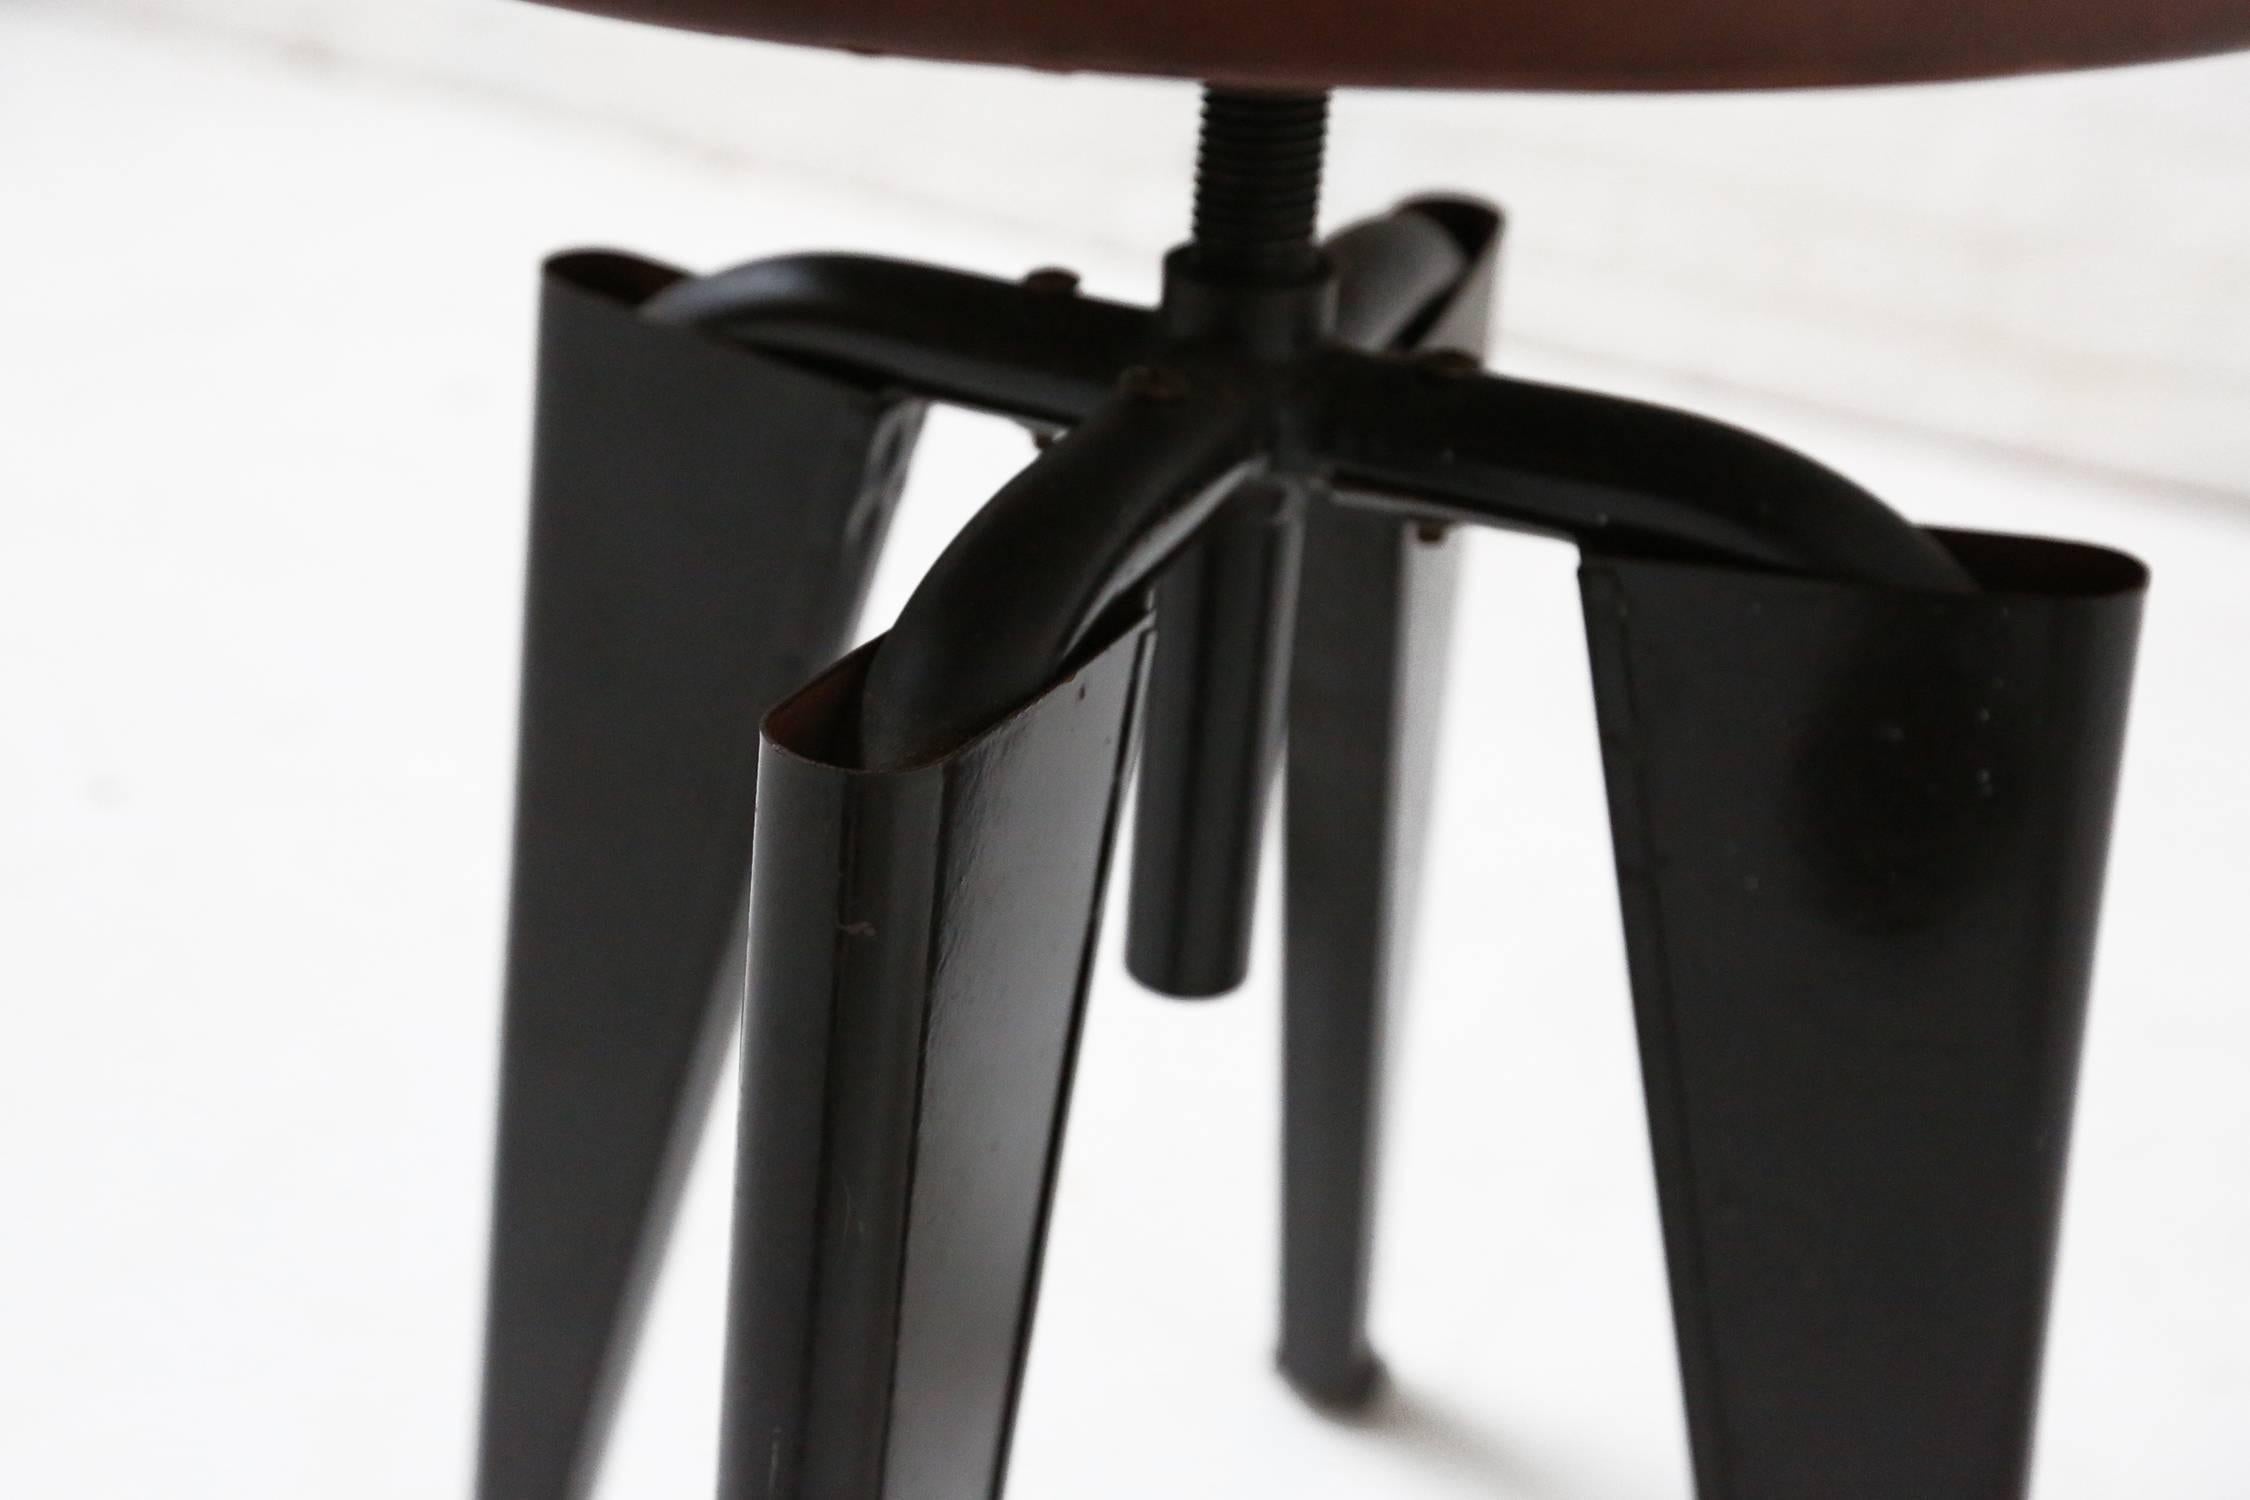 Enameled Jules Leleu, Adjustable Height Stool, circa 1945 in the Style of Prouve